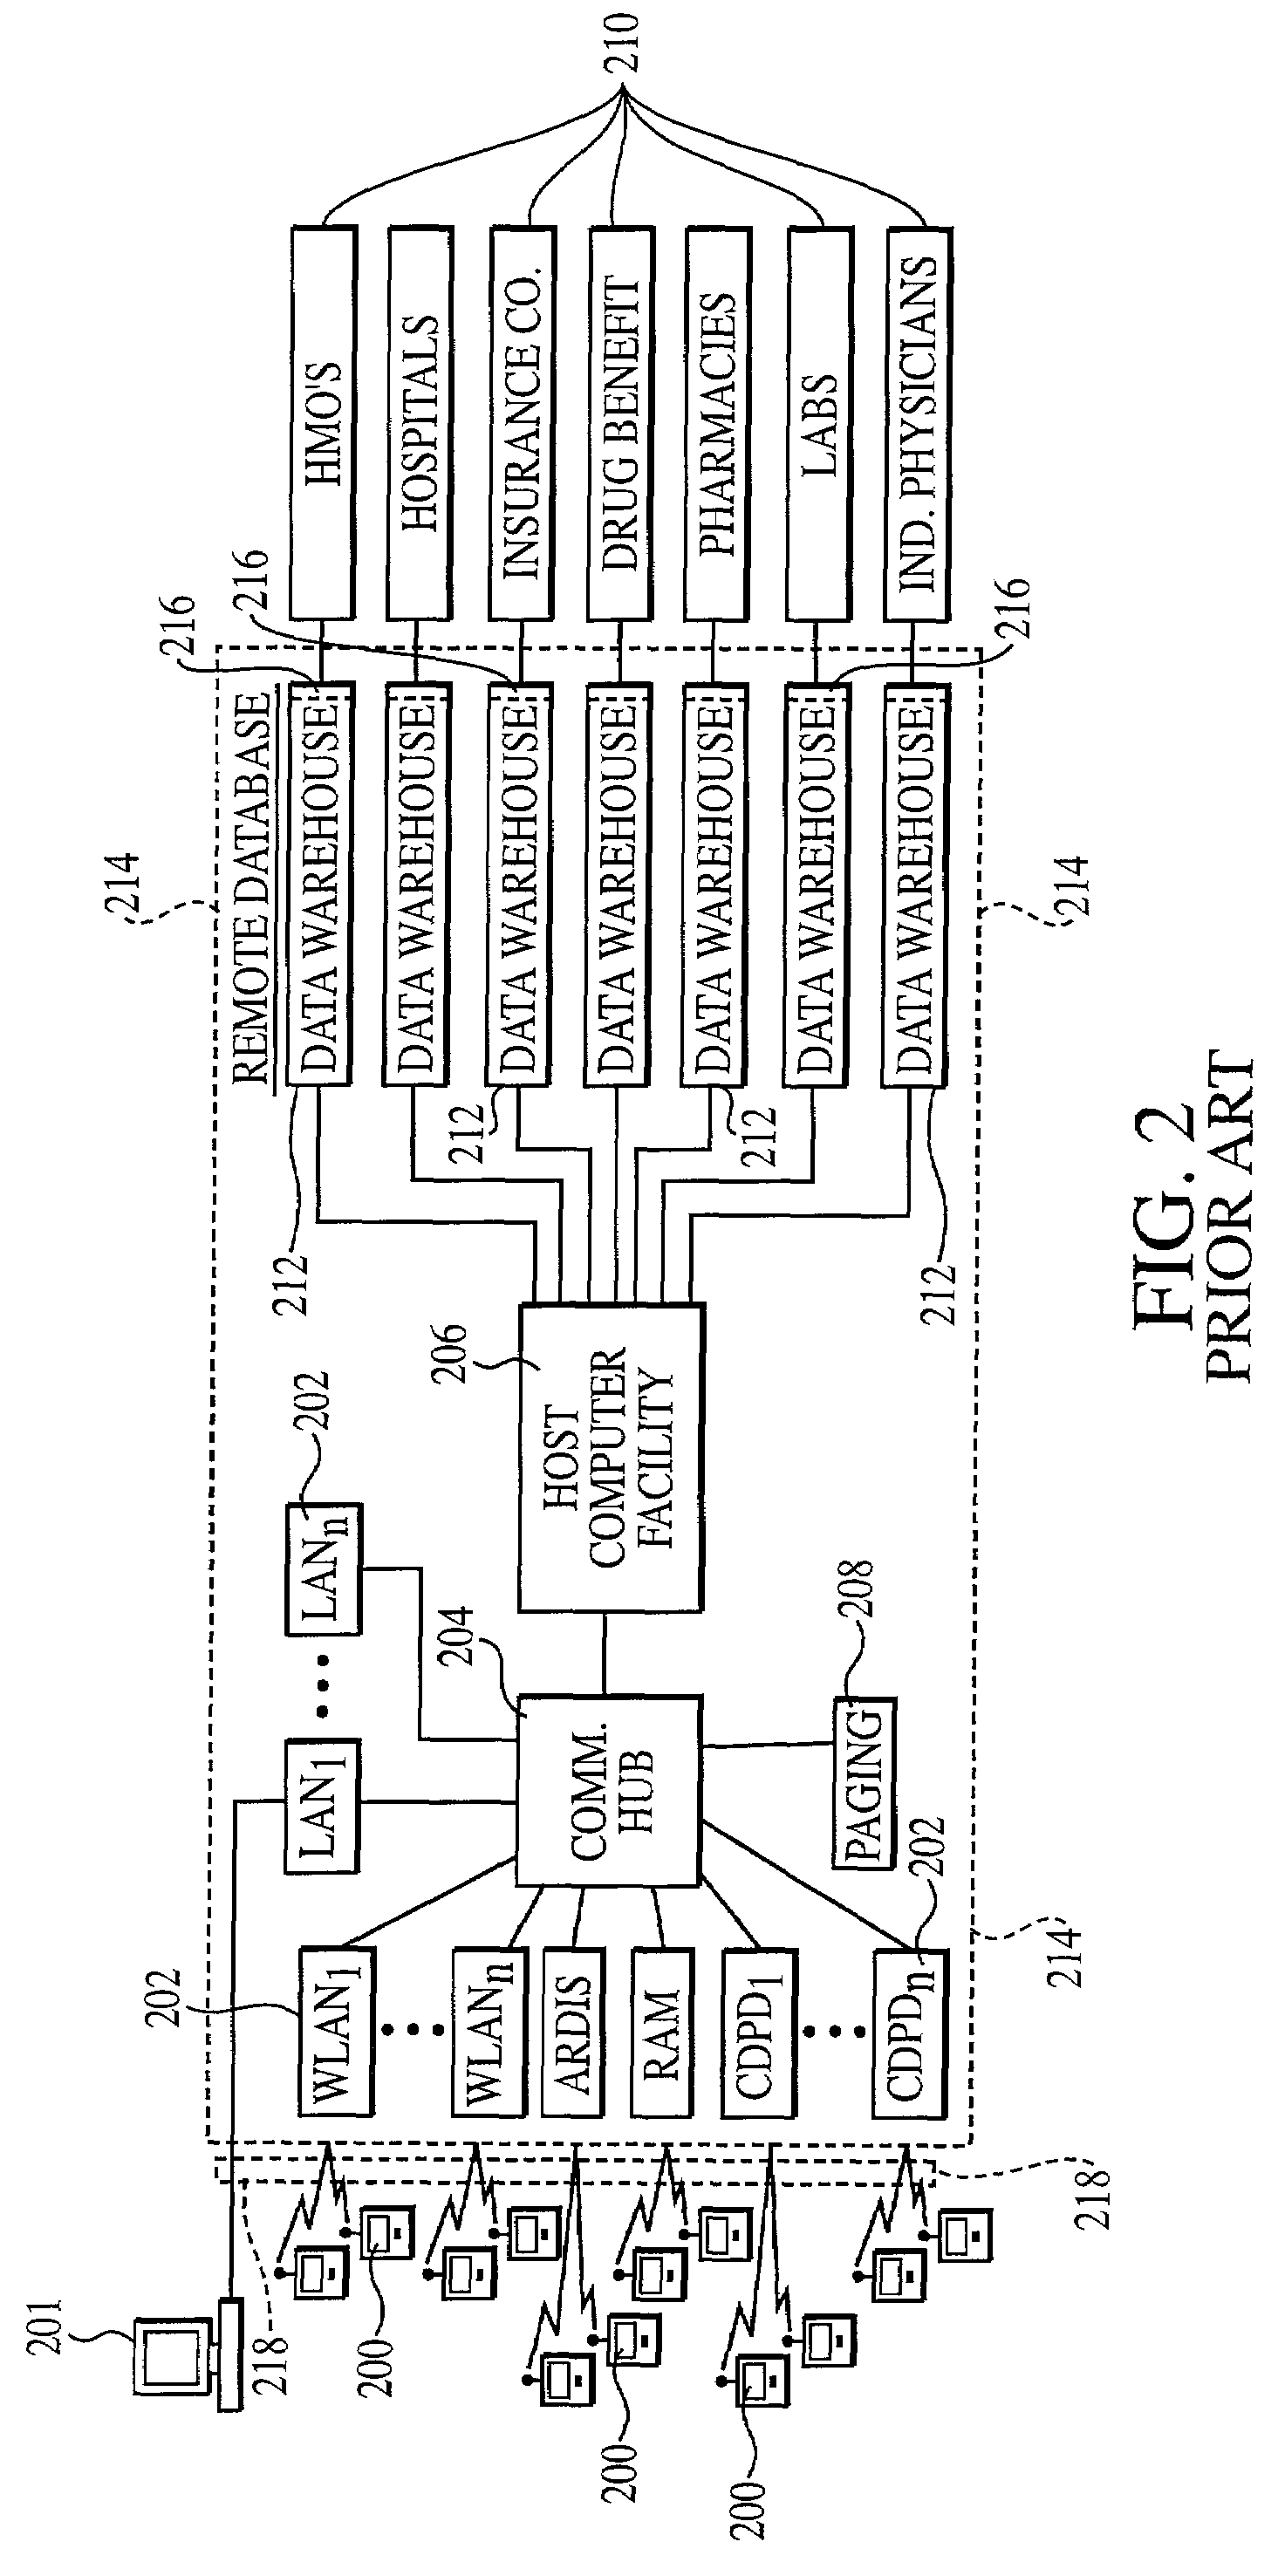 Patient oriented point of care system and method